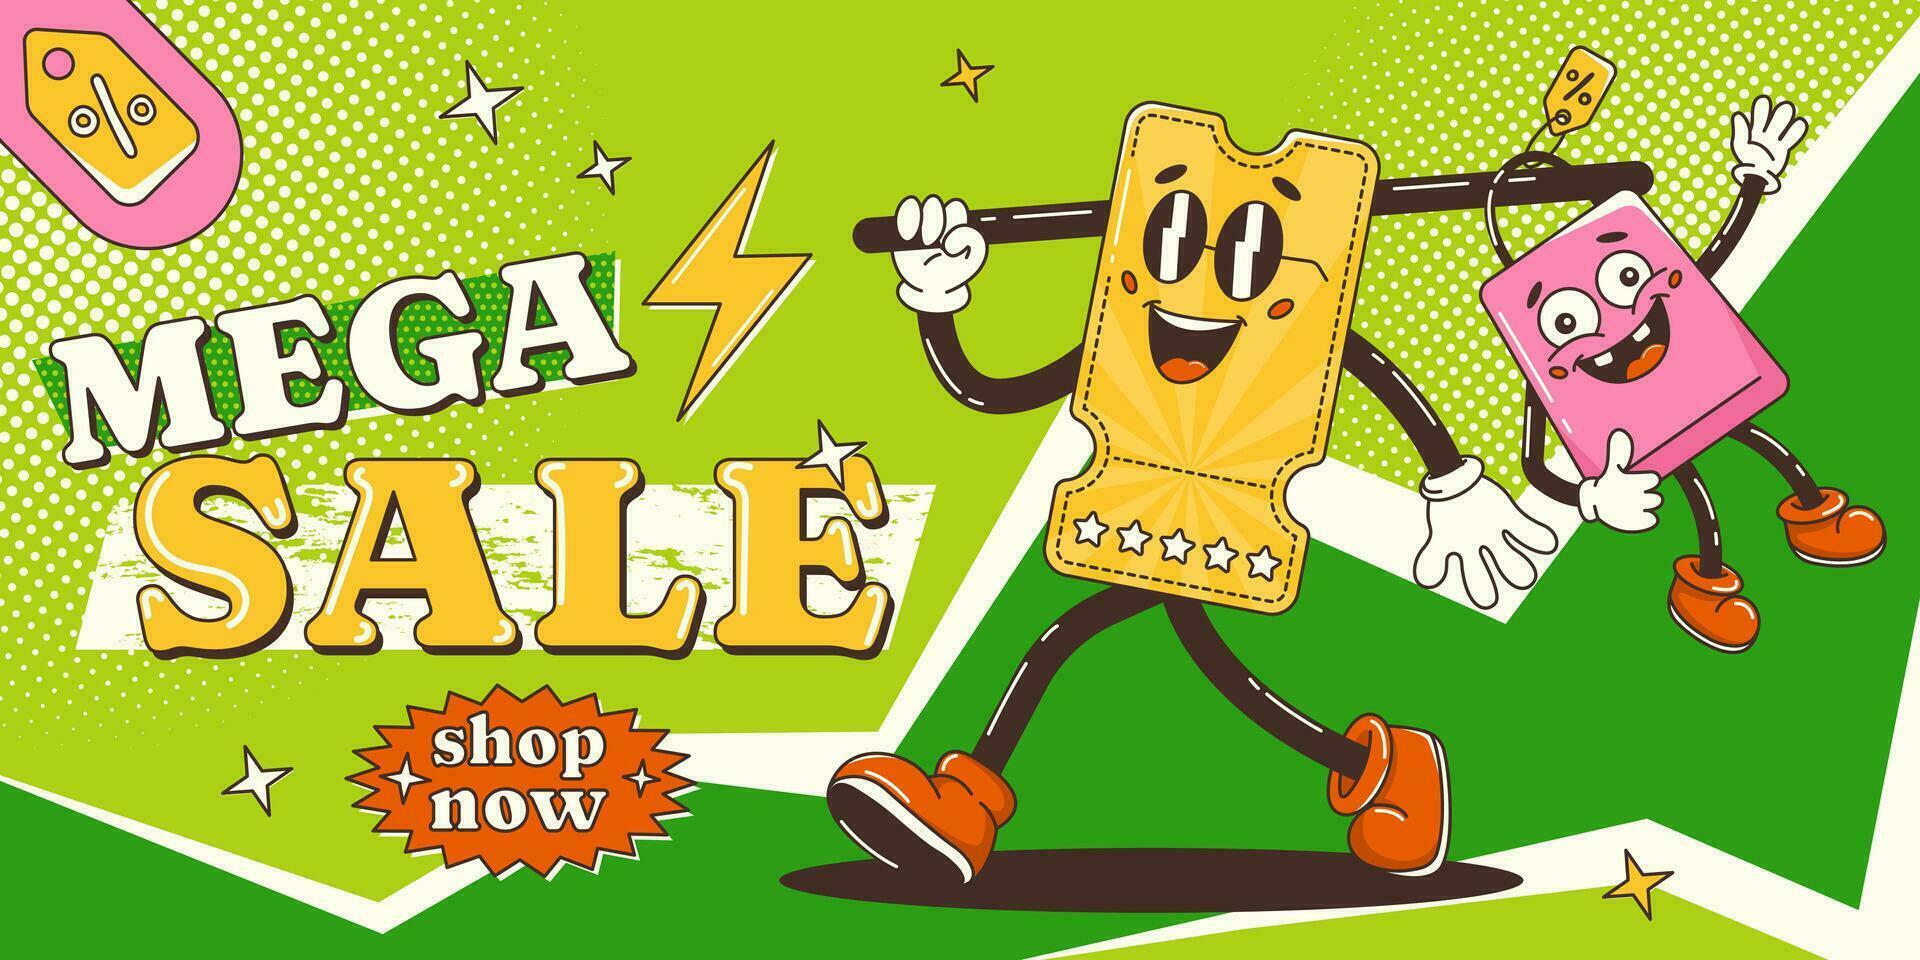 Mega sale banner, retro groovy discount coupon character goes with sale bag. Shop now. Vector pop art background with halftone, abstract geometric shapes. For business, advertising, poster